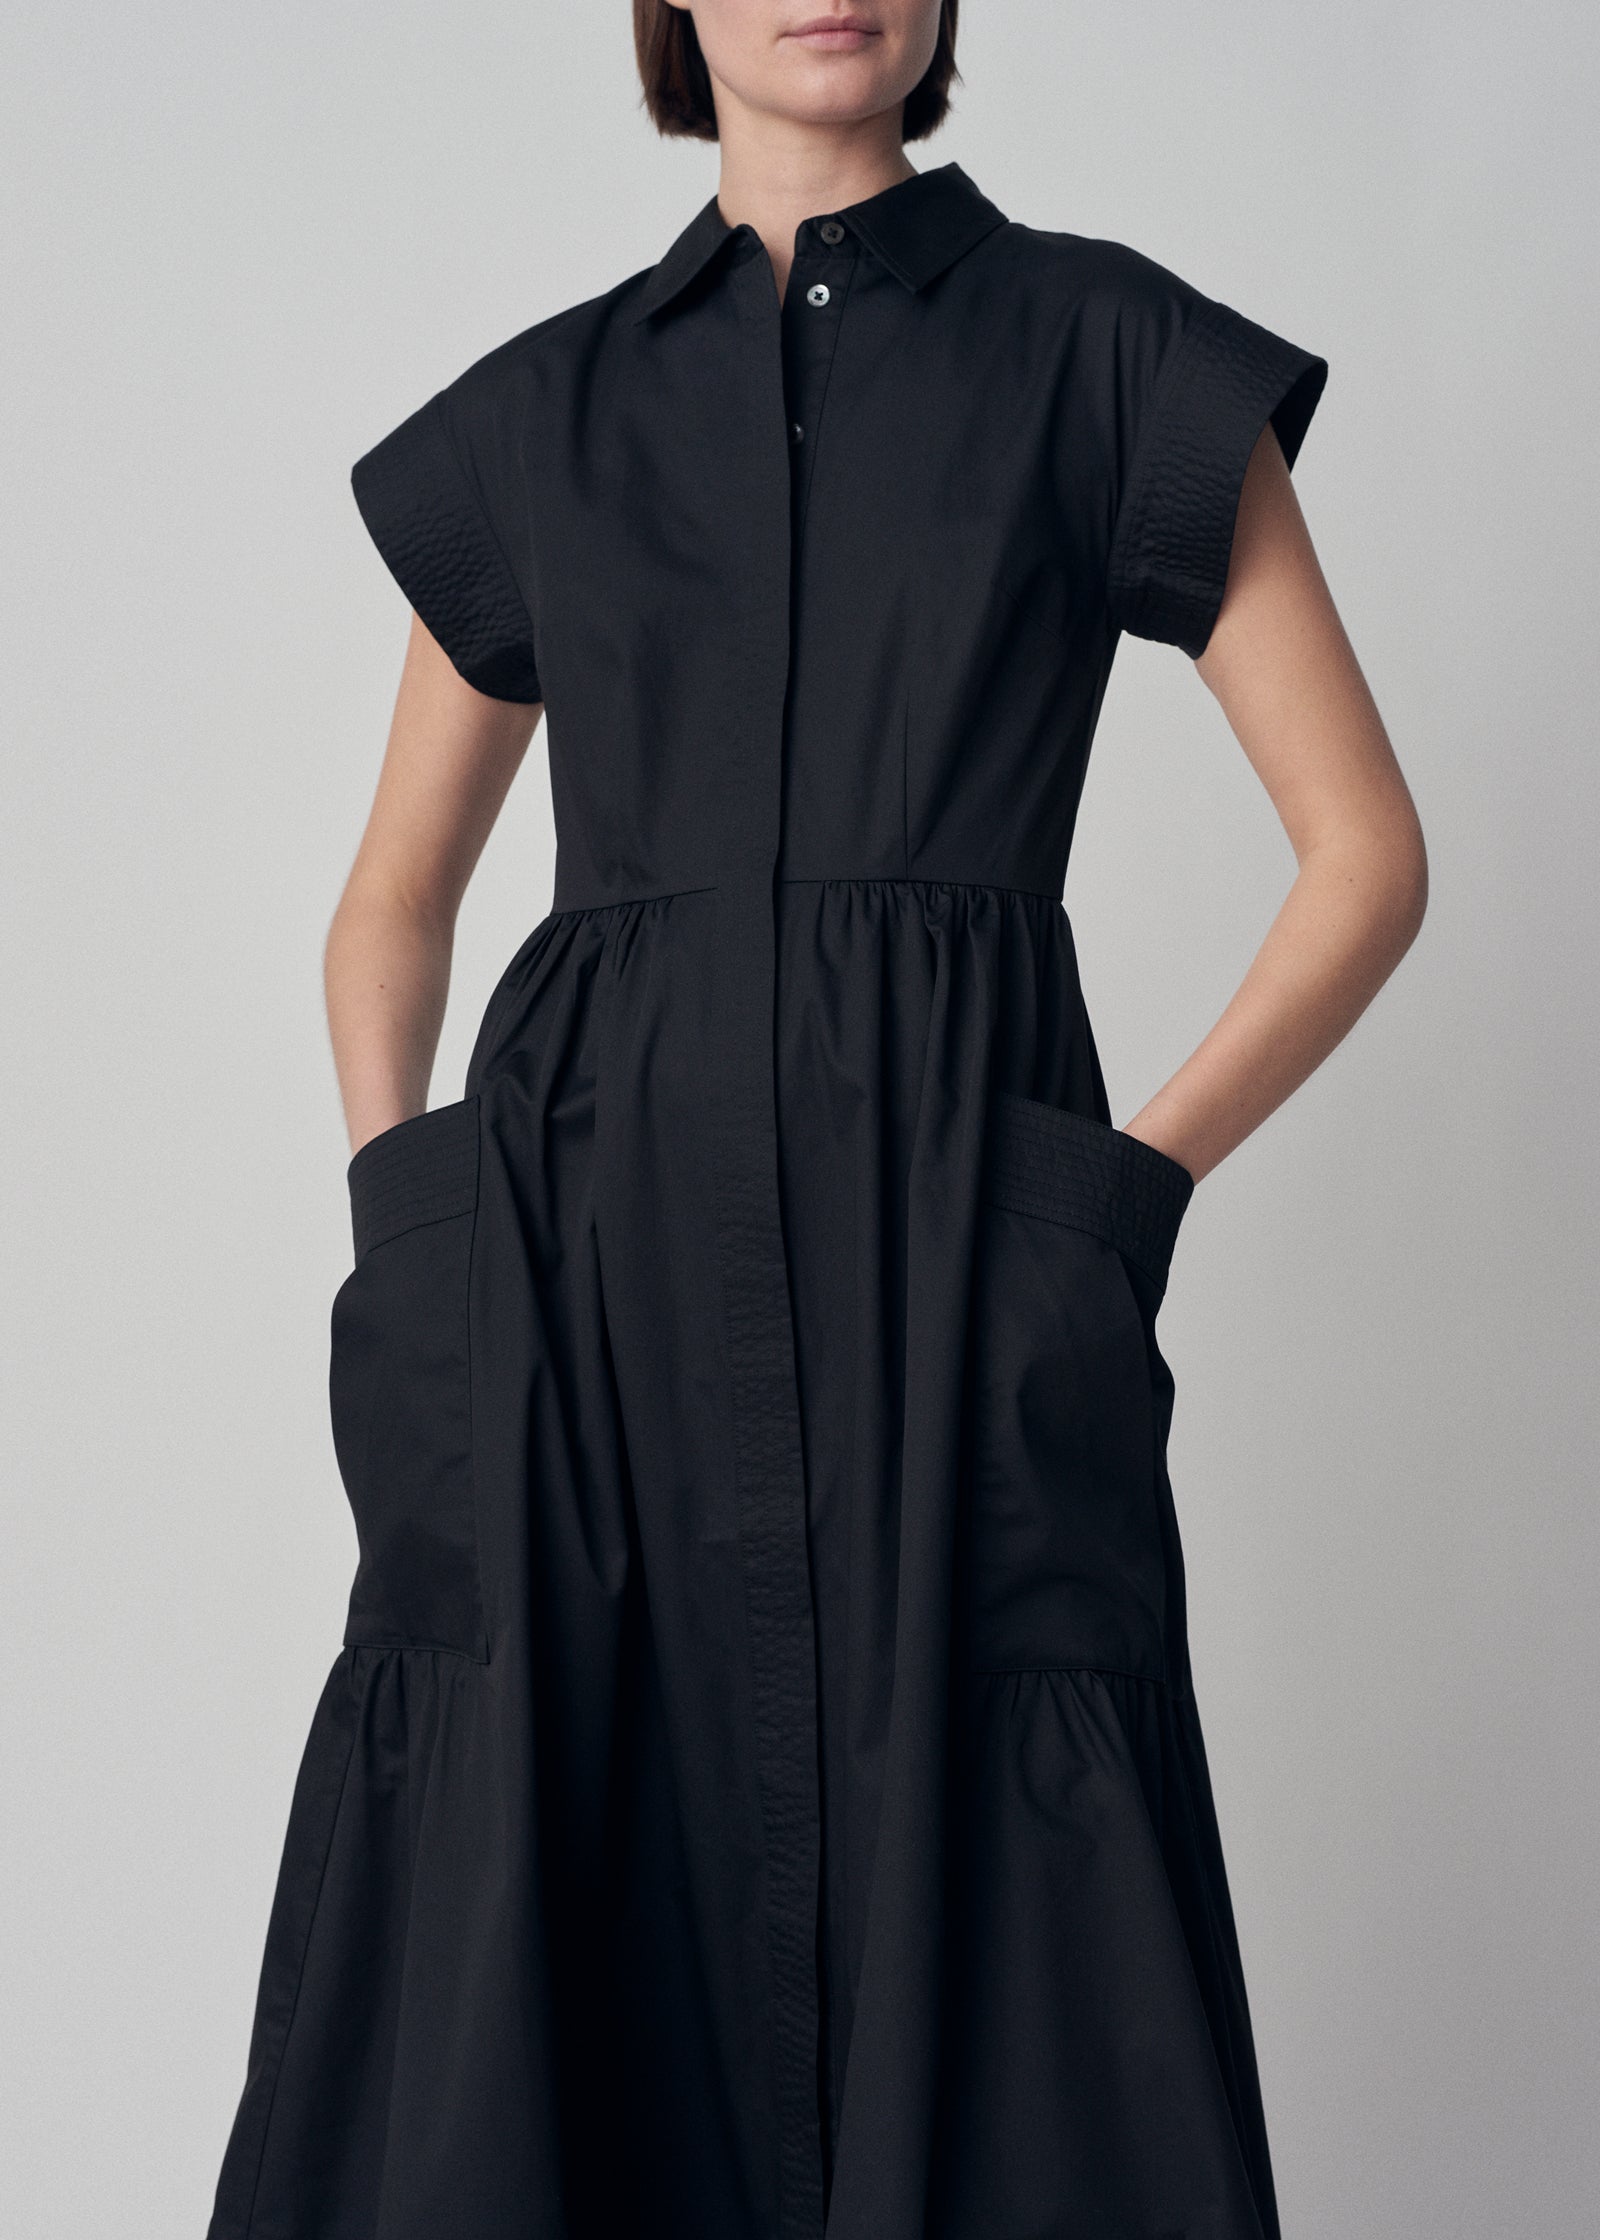 Cap Sleeve Dress in Cotton Poplin - Black - CO Collections